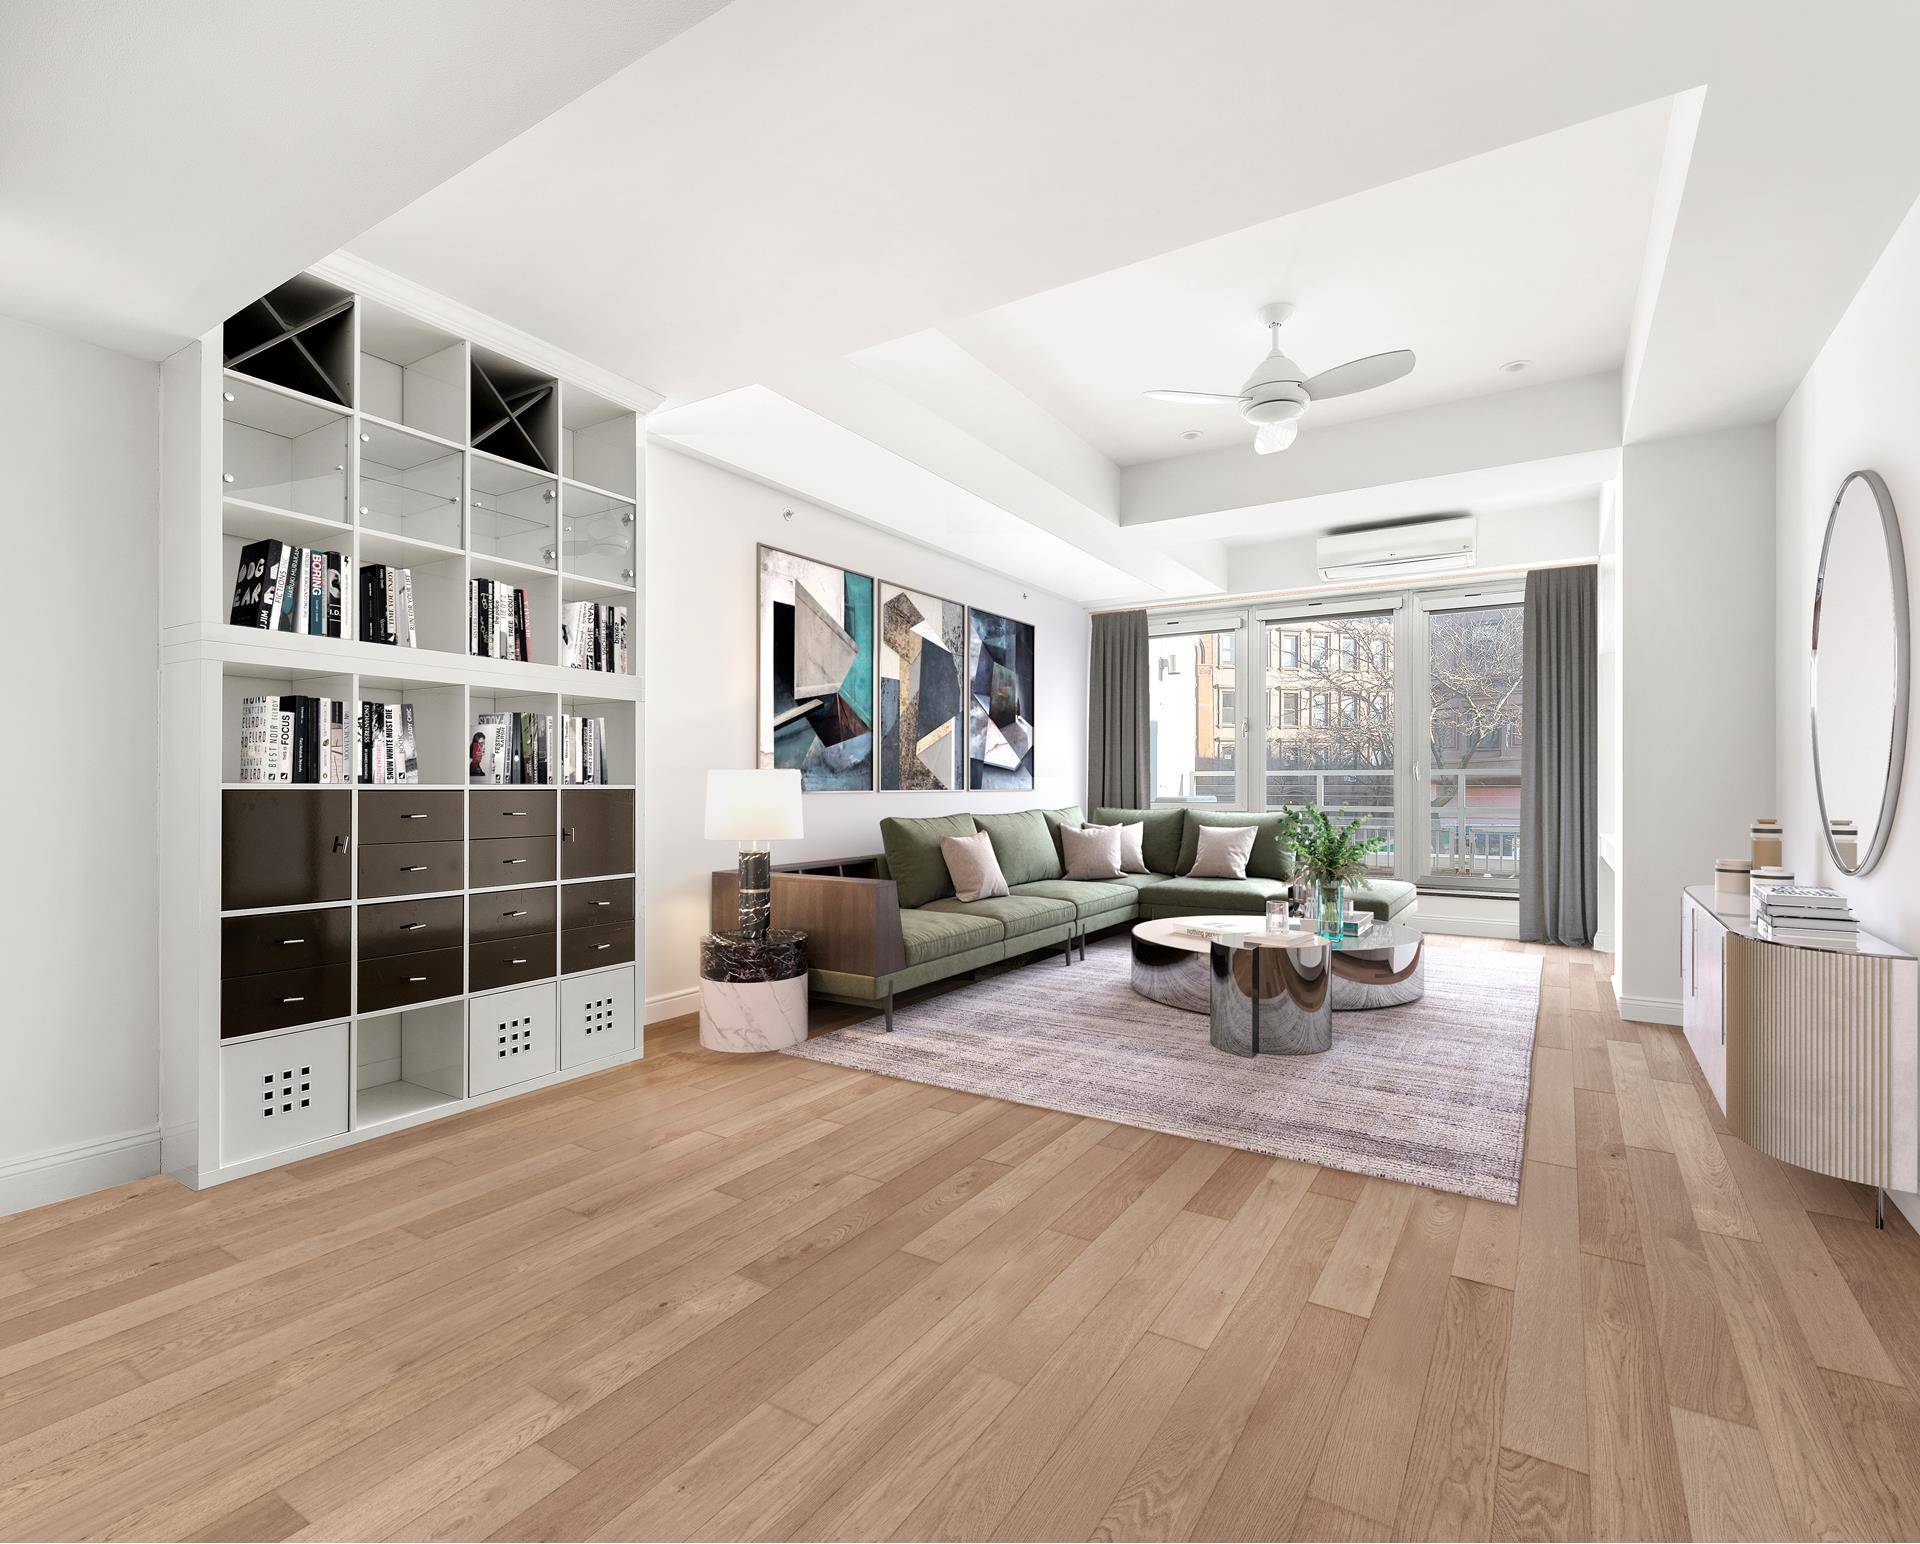 Located in prime Park Slope, 145 Park Place condominium is situated on a coveted tree lined brownstone block in the neighborhood.